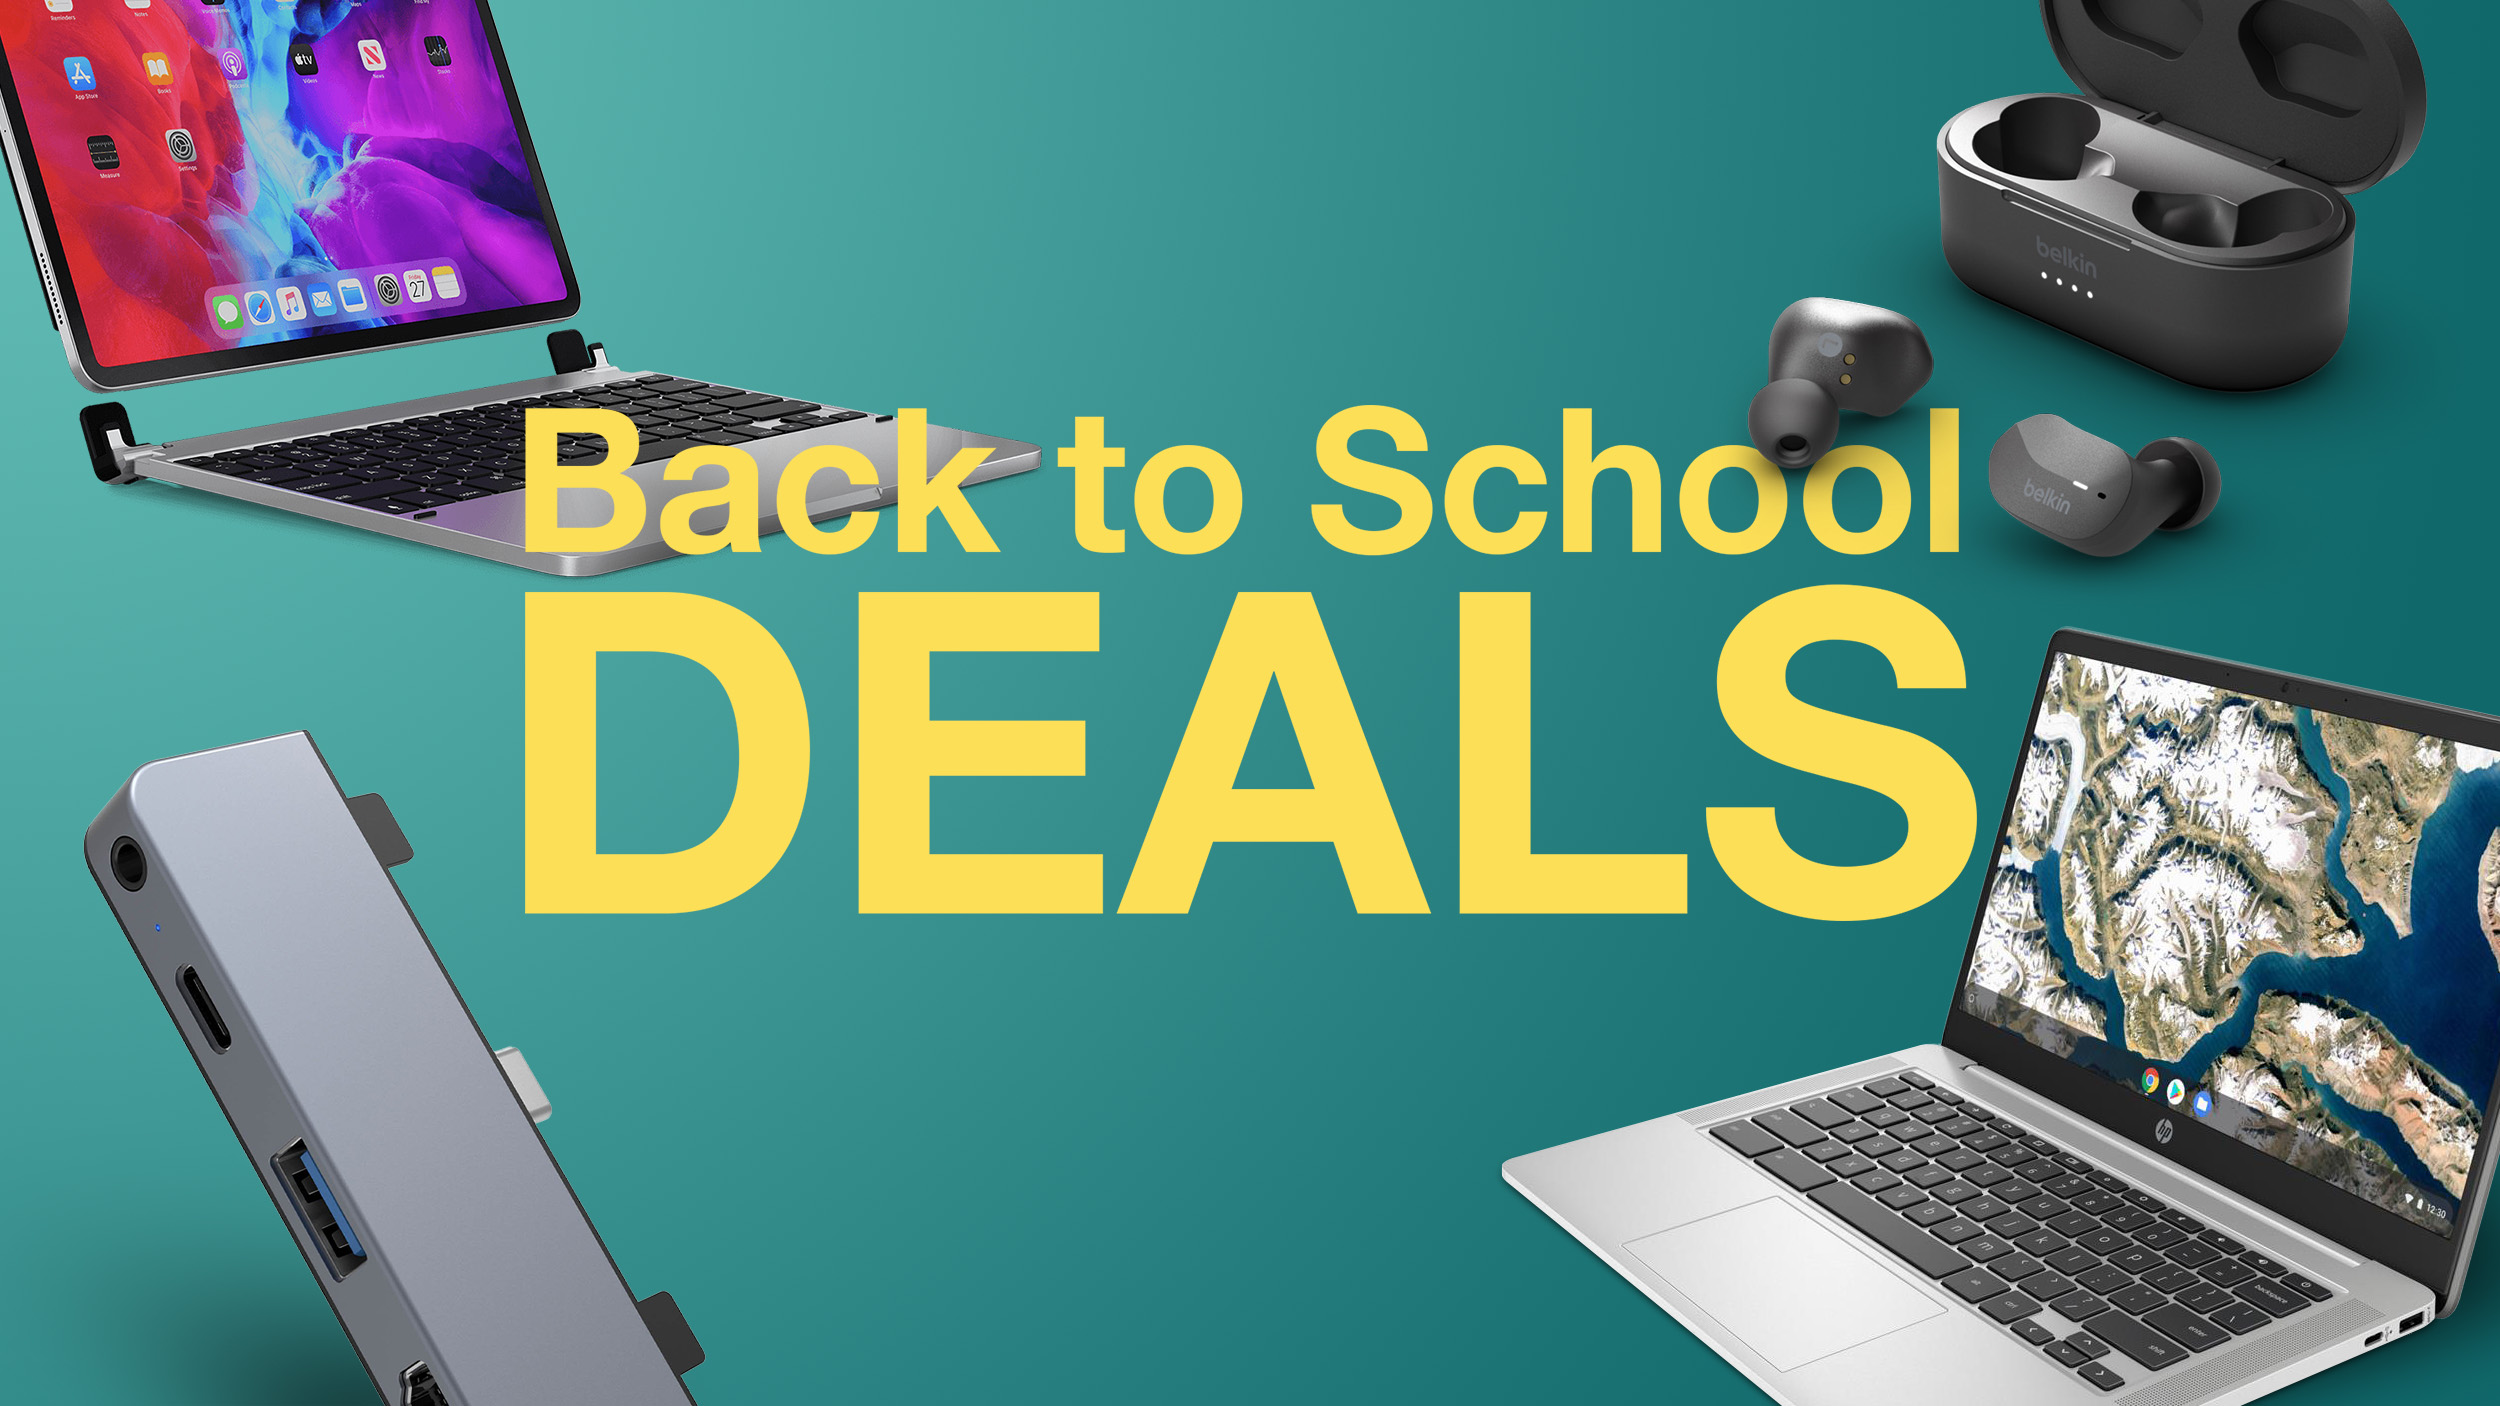 Shop Even More Back To School Apple Accessory Deals From Satechi, Anker, and Das Keyboard